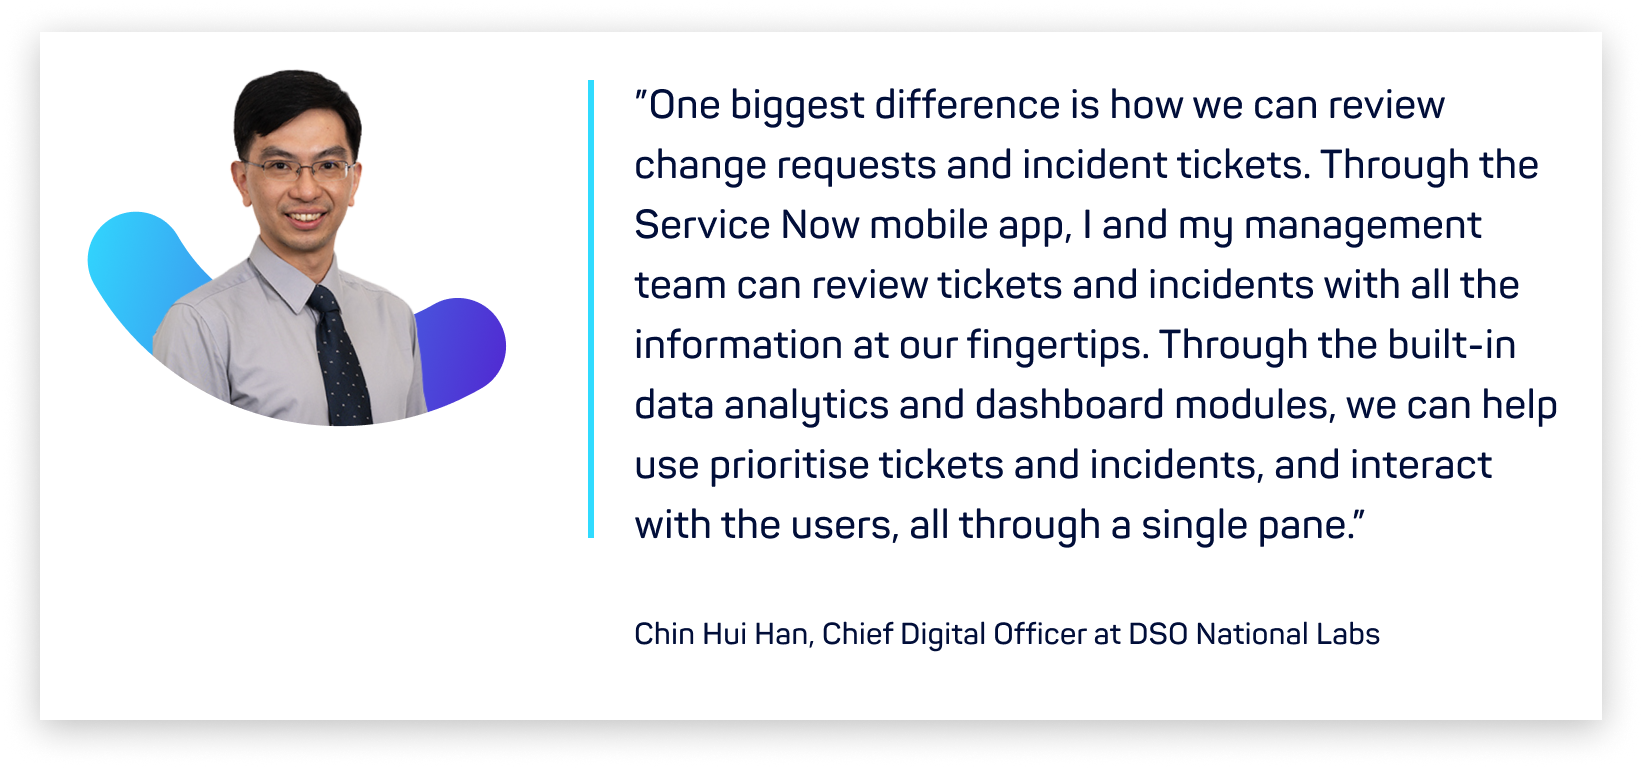 dso activeo apac quote 2